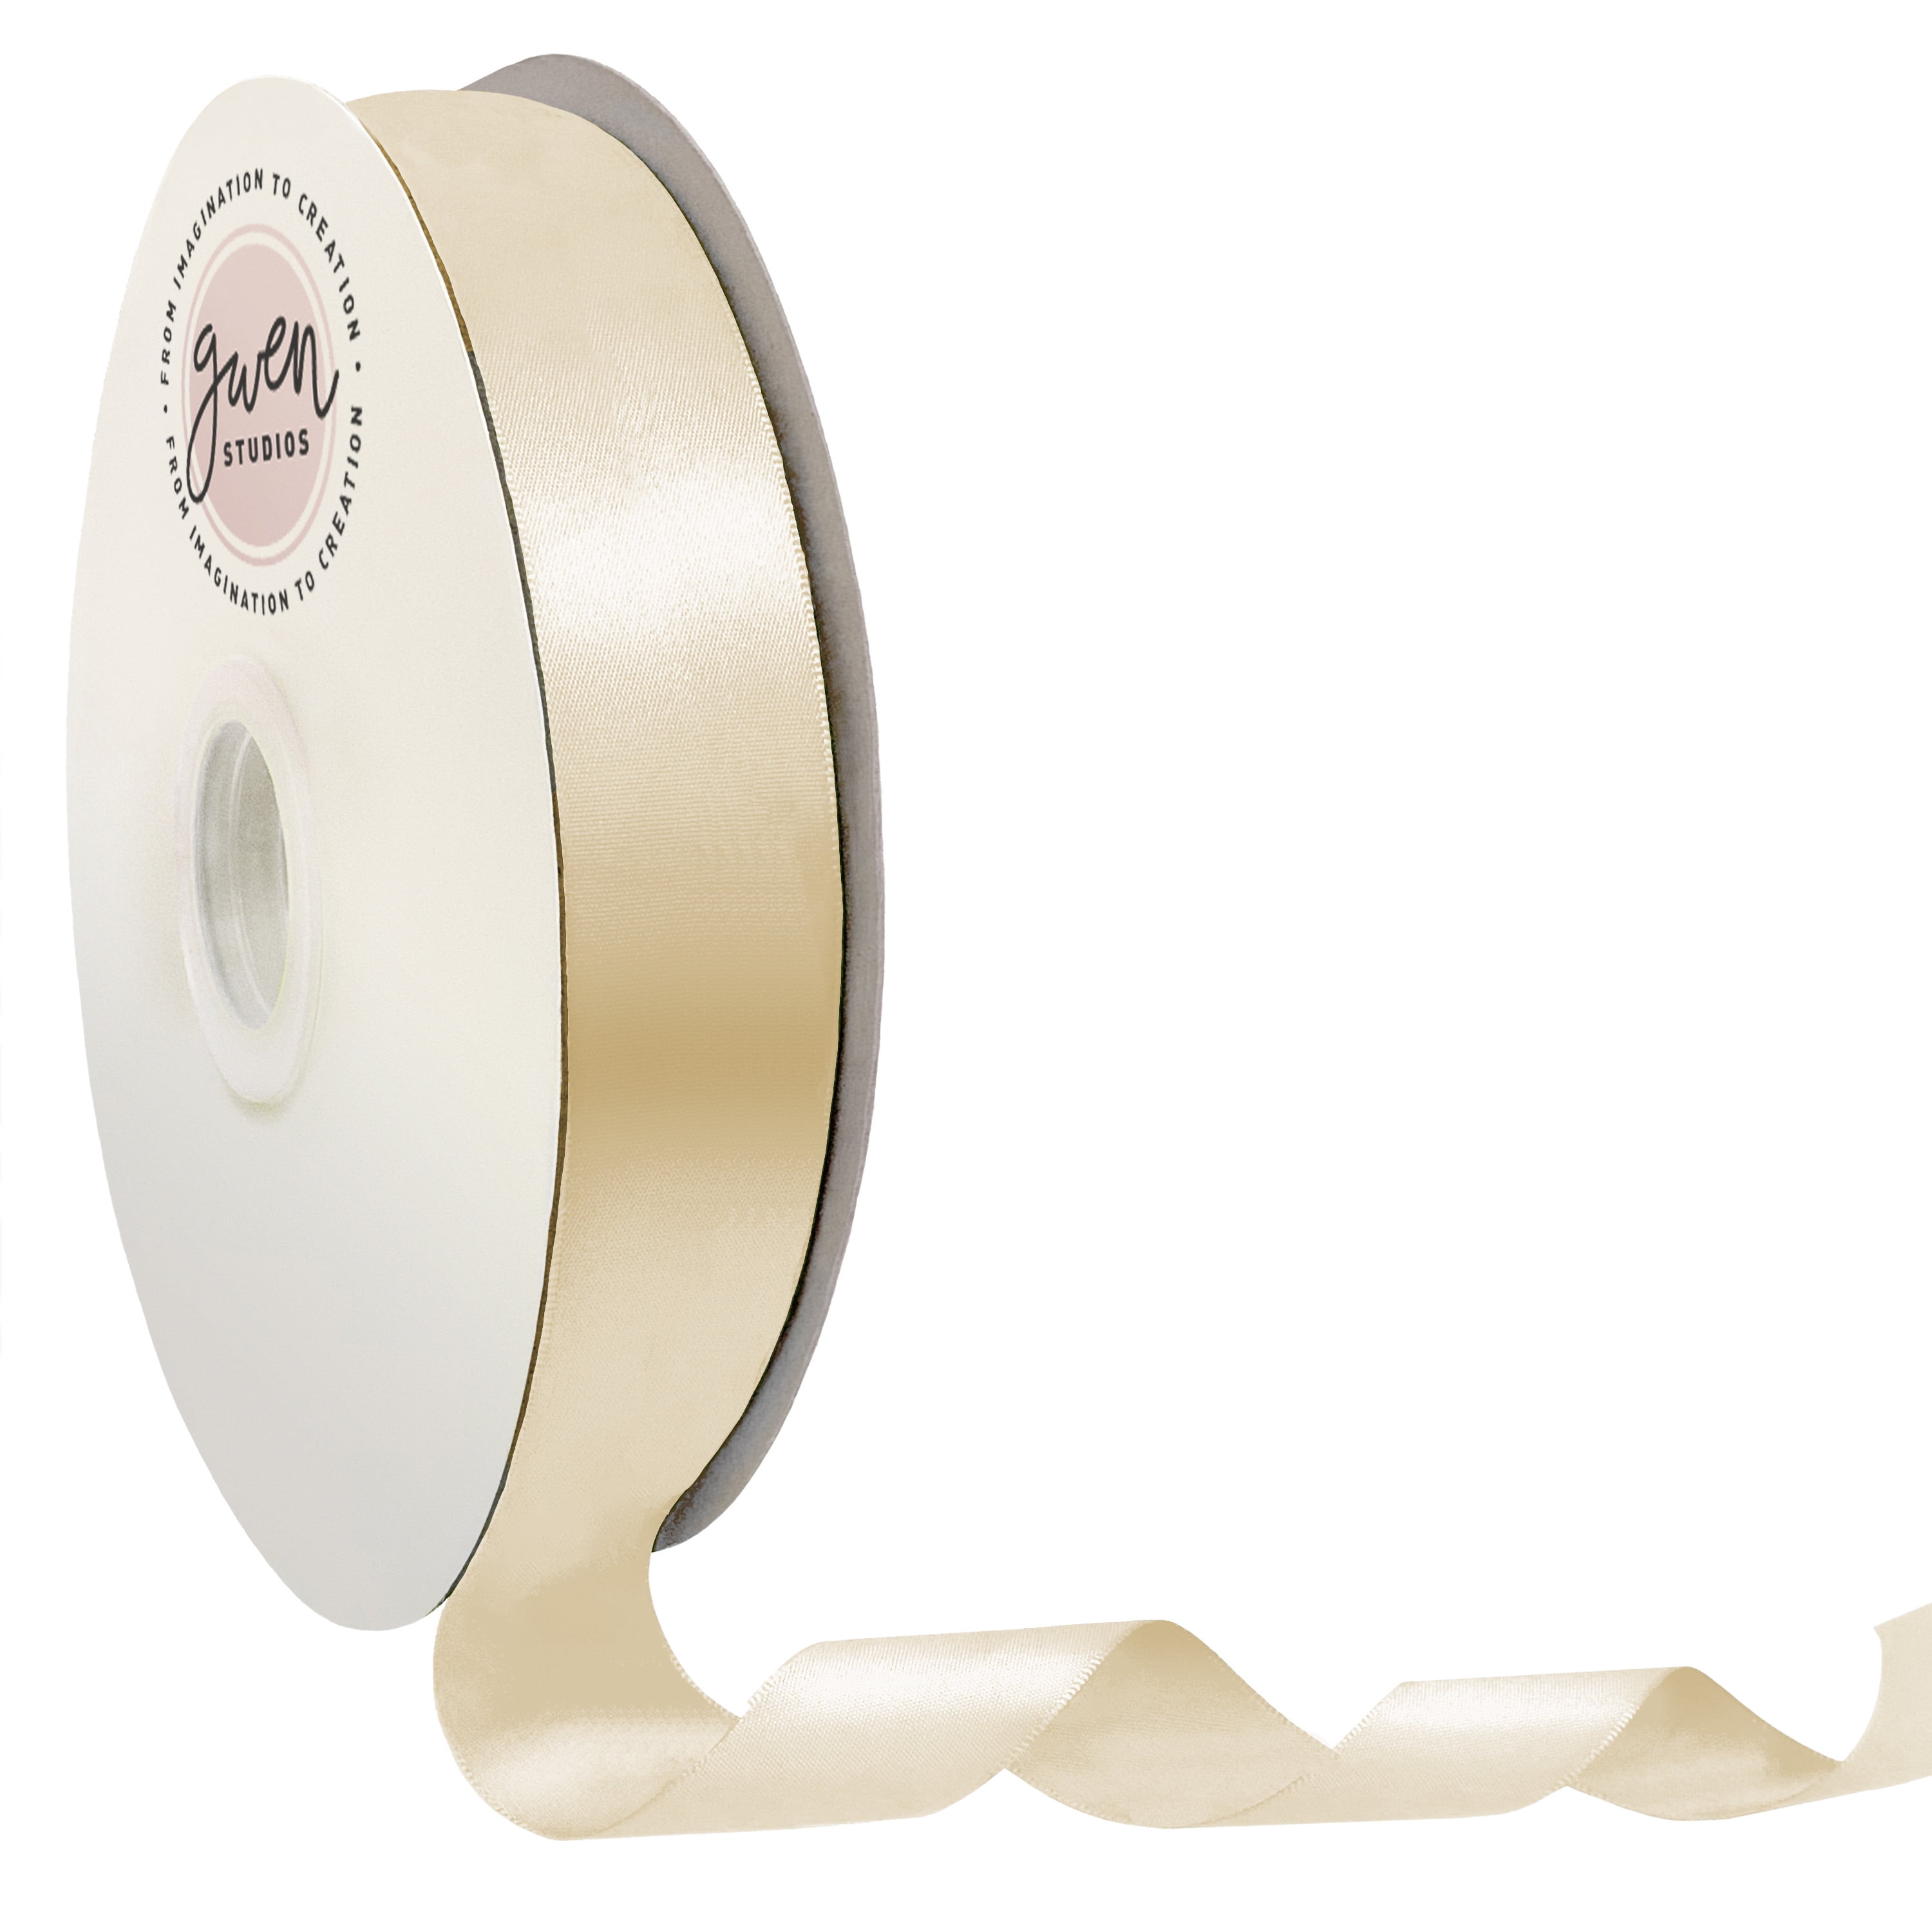 Premium Satin Ribbon 1/4 Inch used for Gift Wrapping